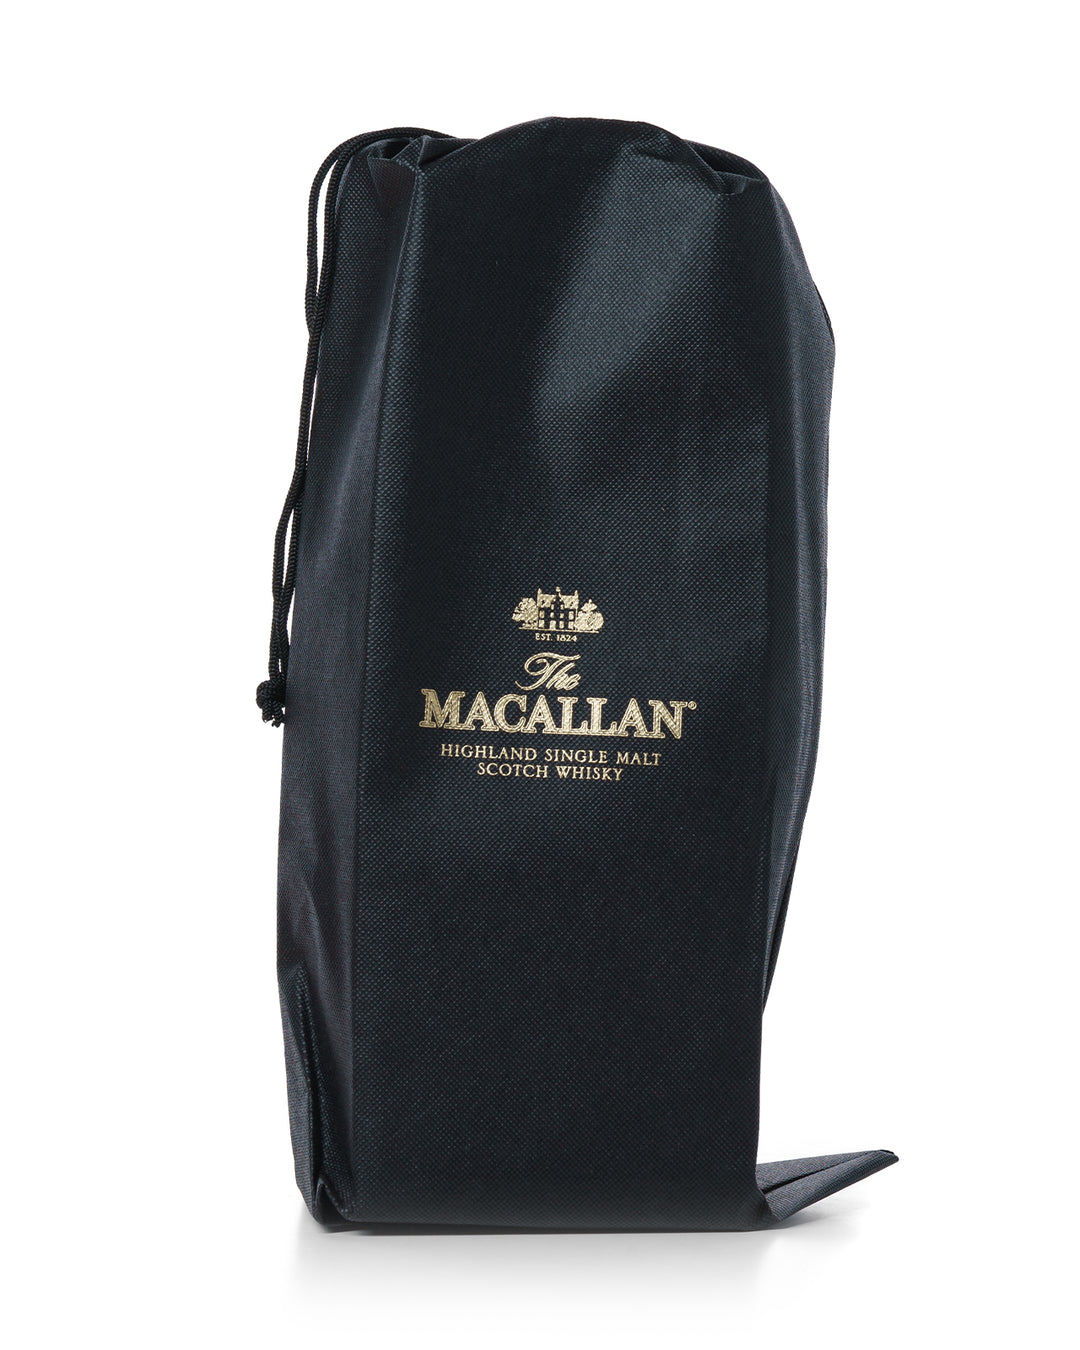 Macallan 30 Year Old 2021 Release With Wooden Original Box